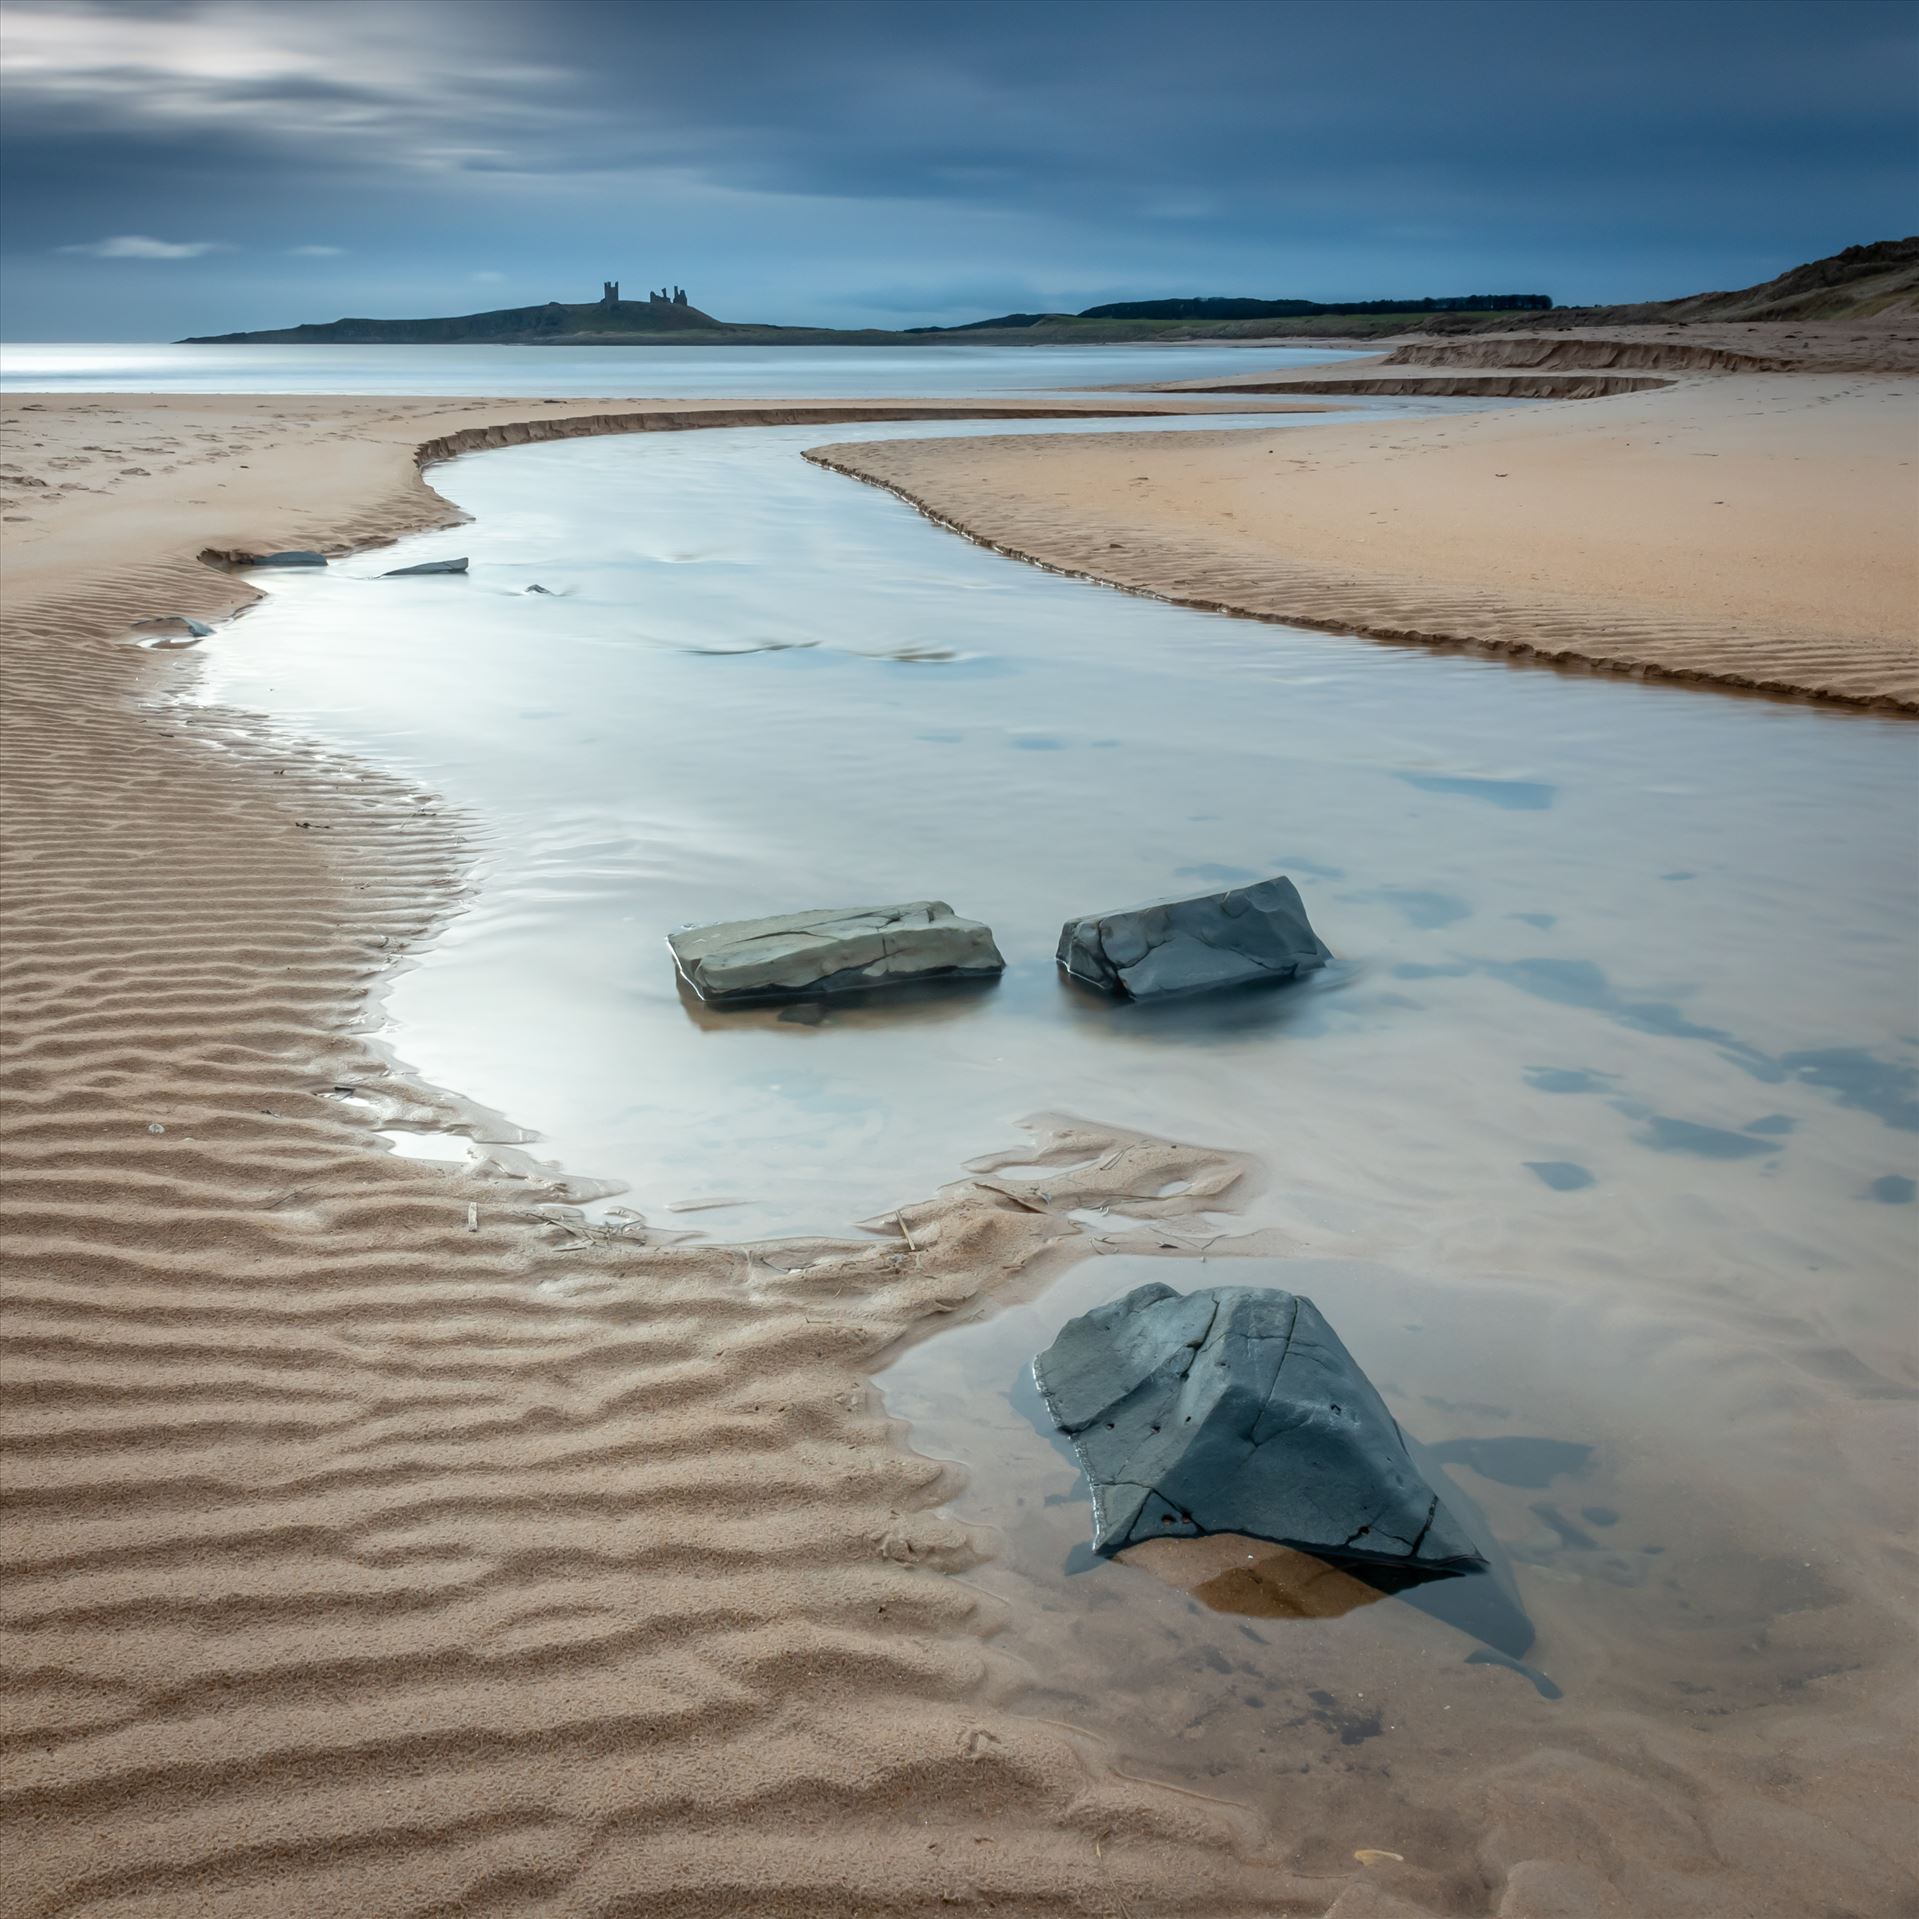 Embleton Bay, Northumberland - Taken at Embleton Bay, Northumberland with Dunstanburgh Castle in the background by philreay